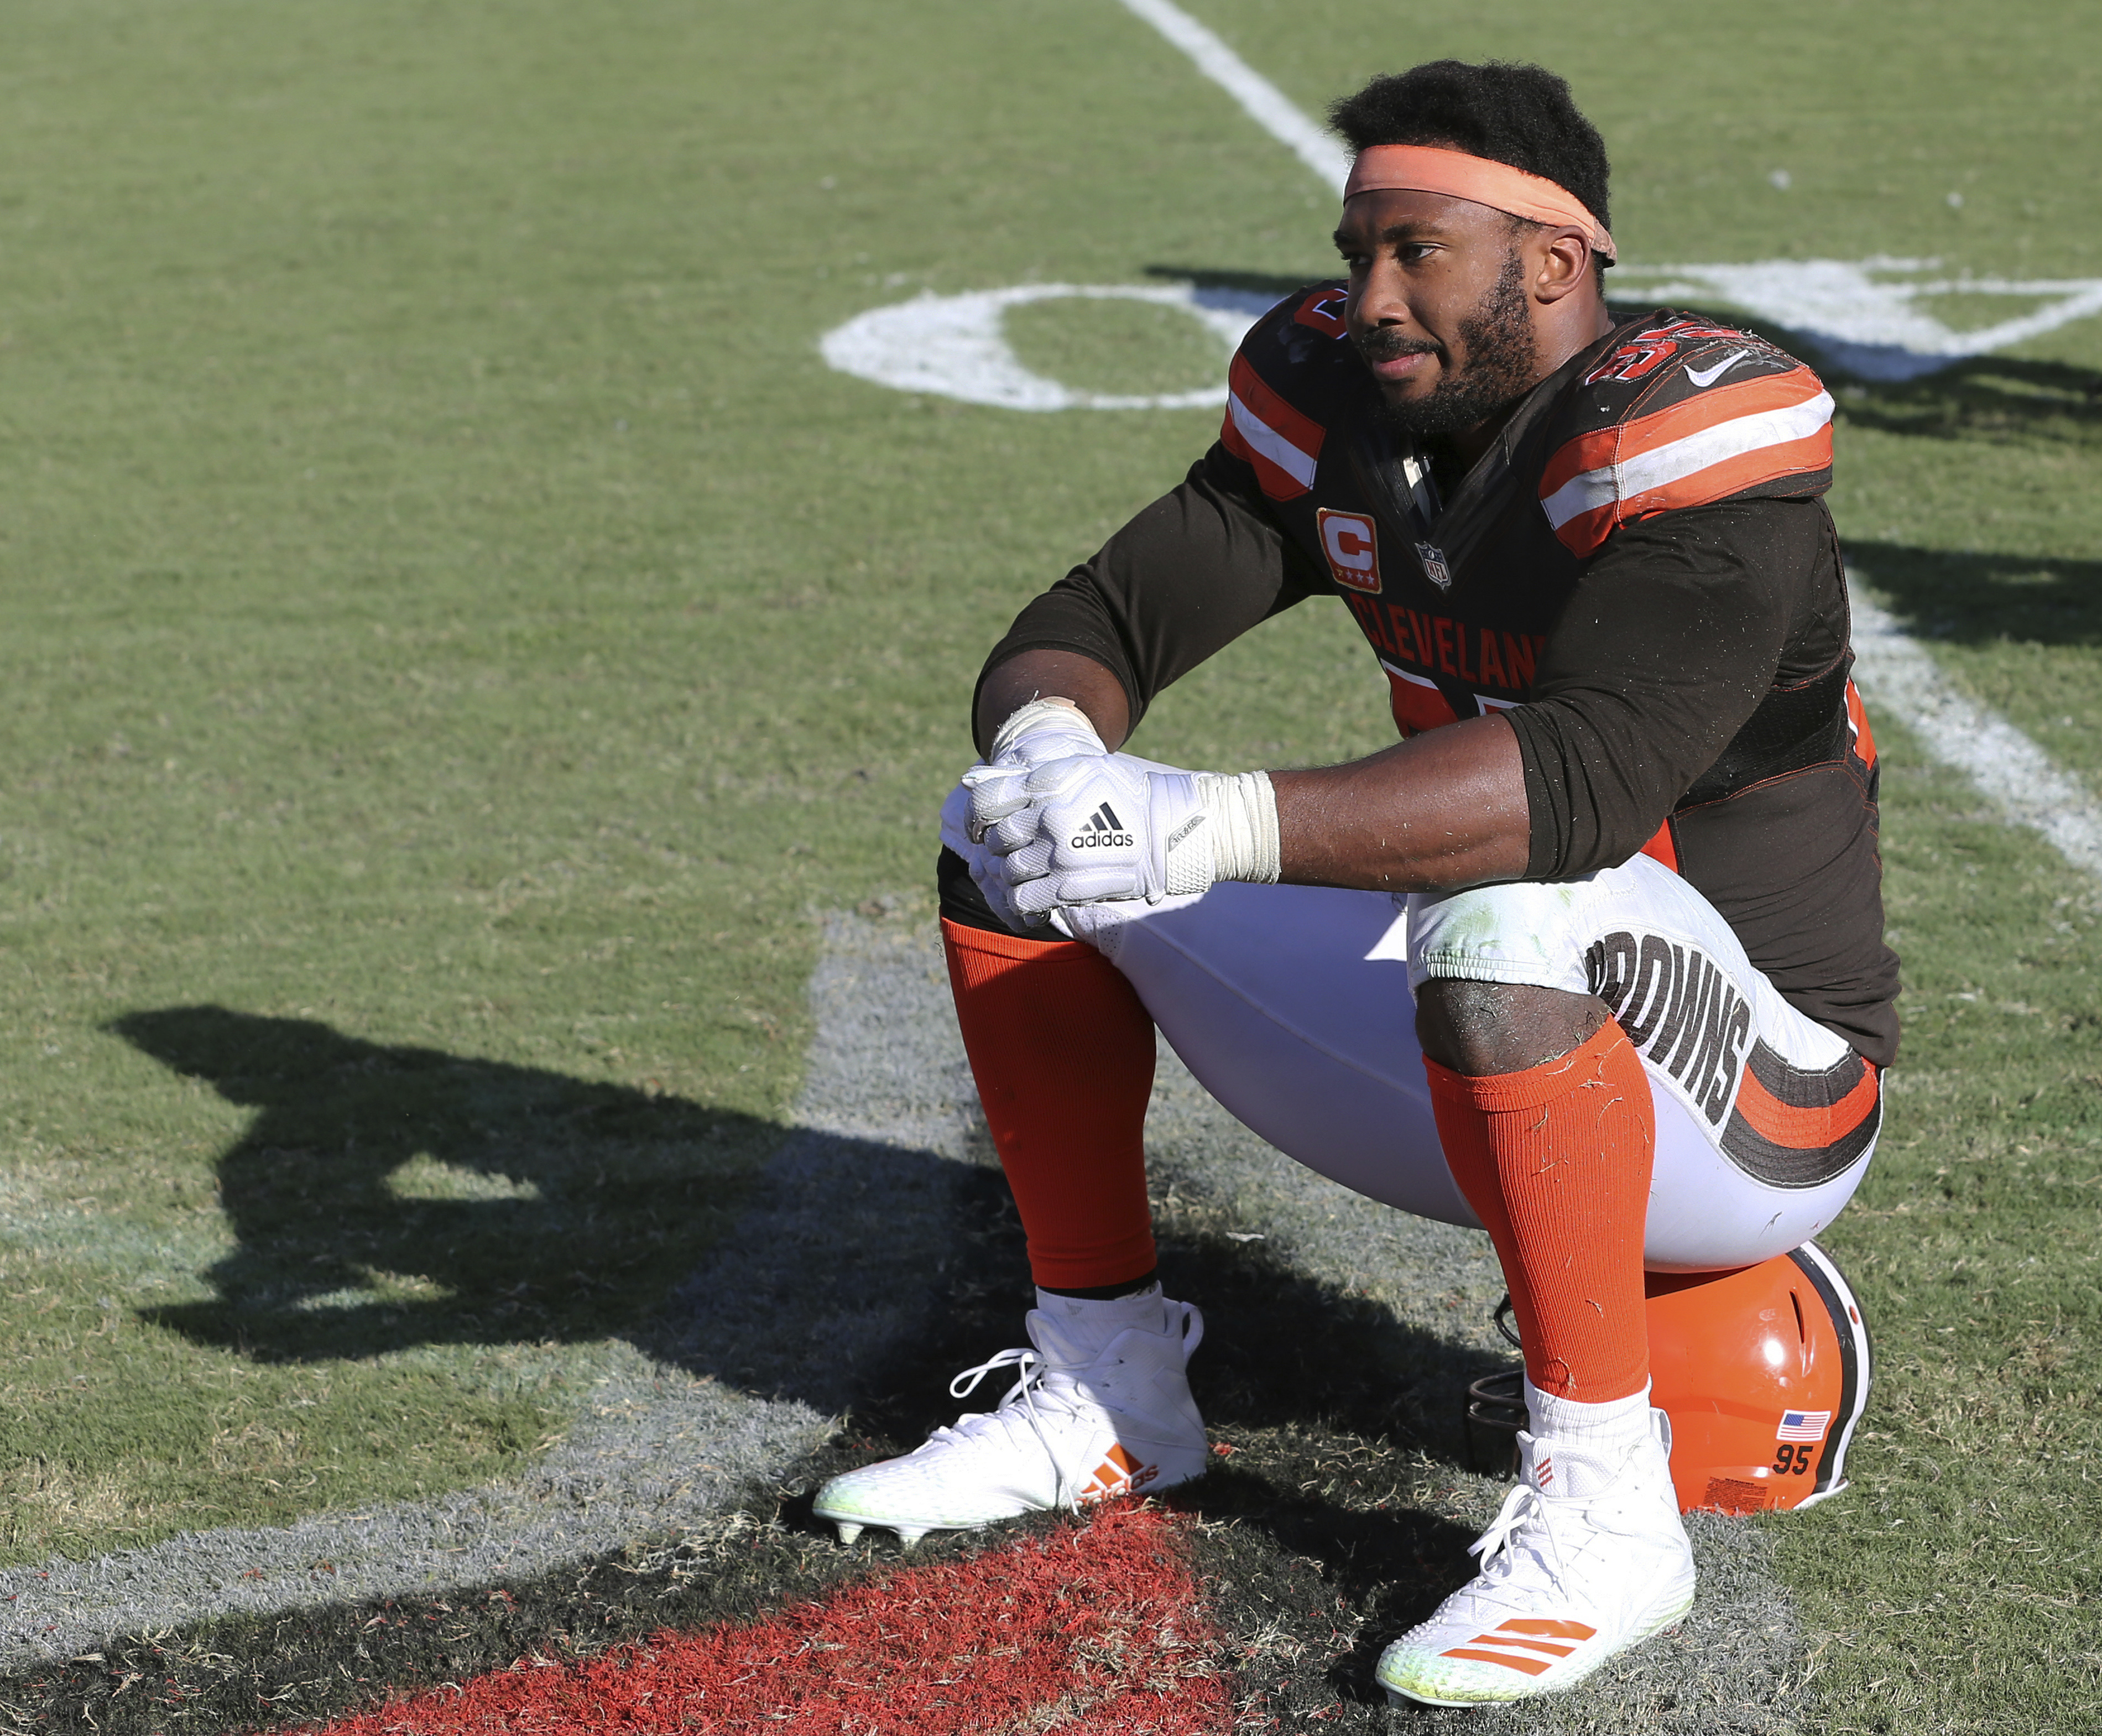 Mistakes undermine Browns again in close loss to Buccaneers